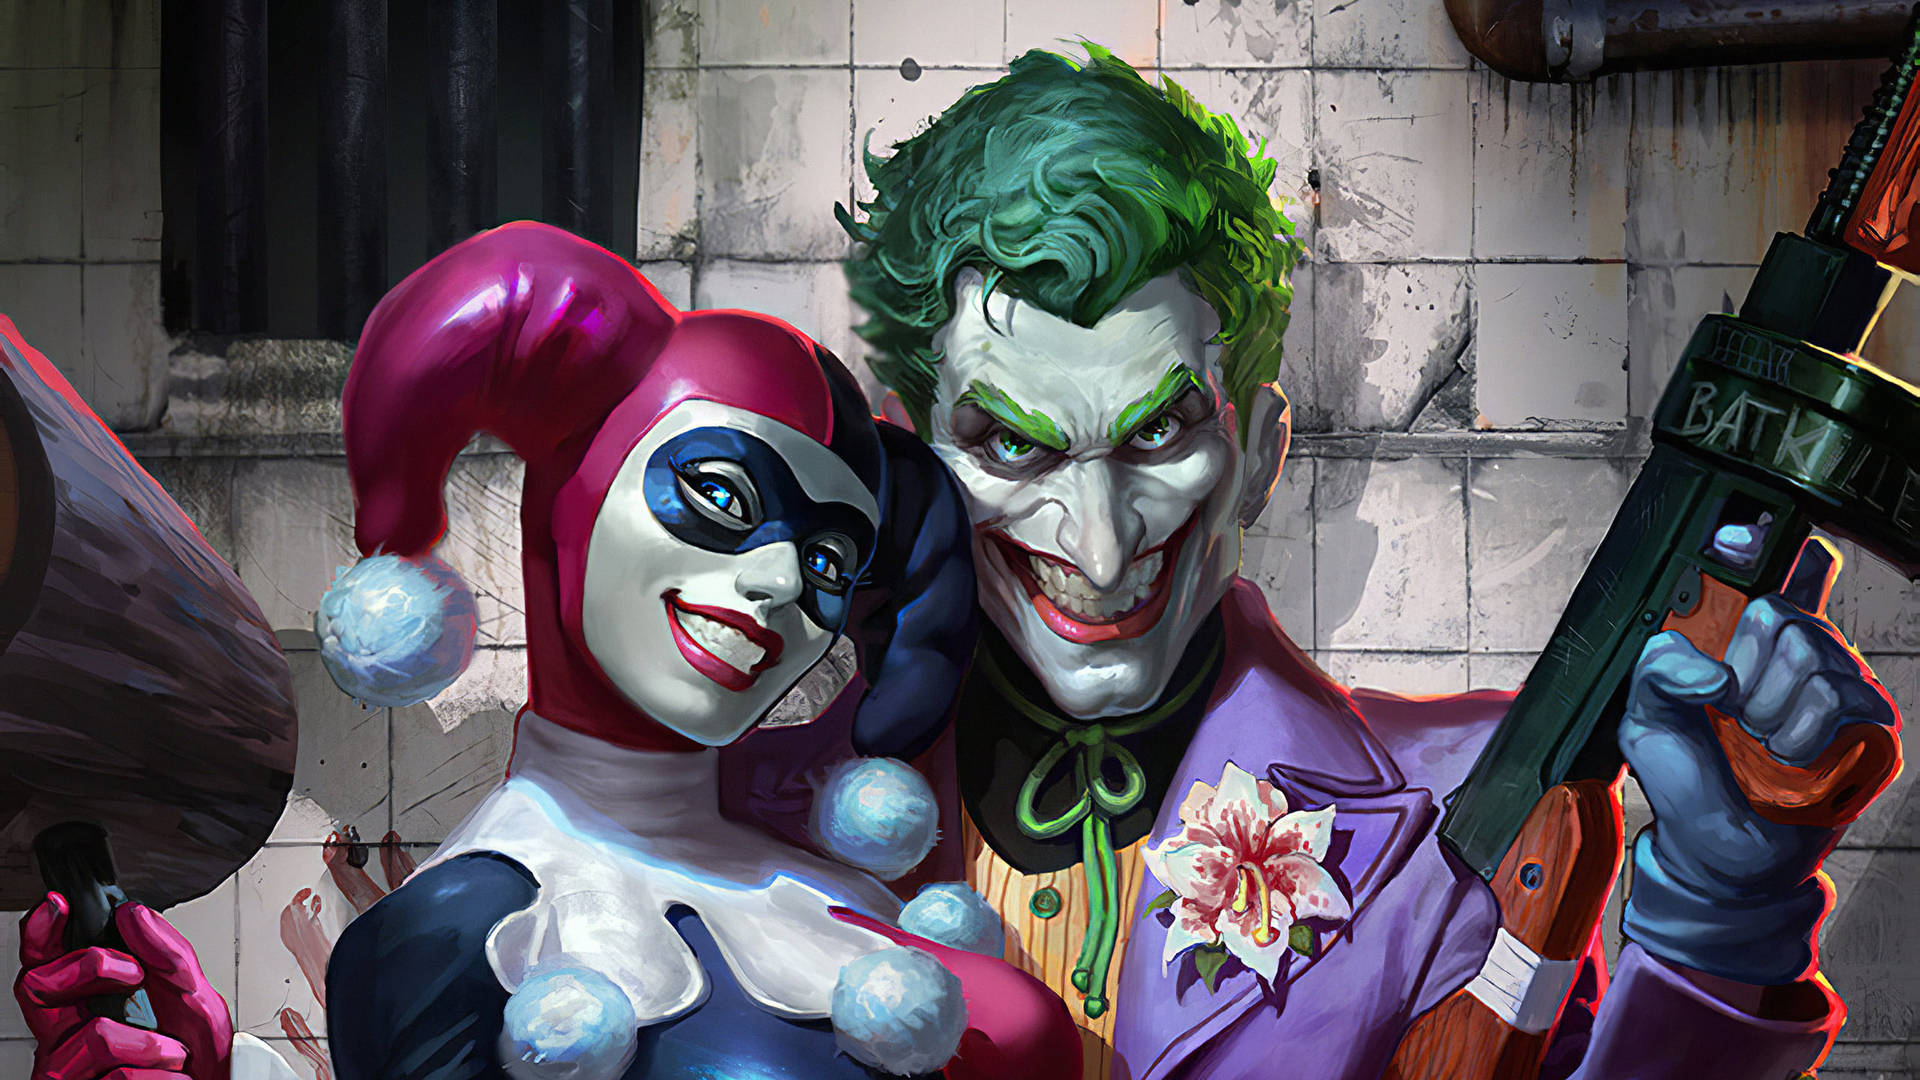 Joker And Harley Quinn With Weapons Wallpaper